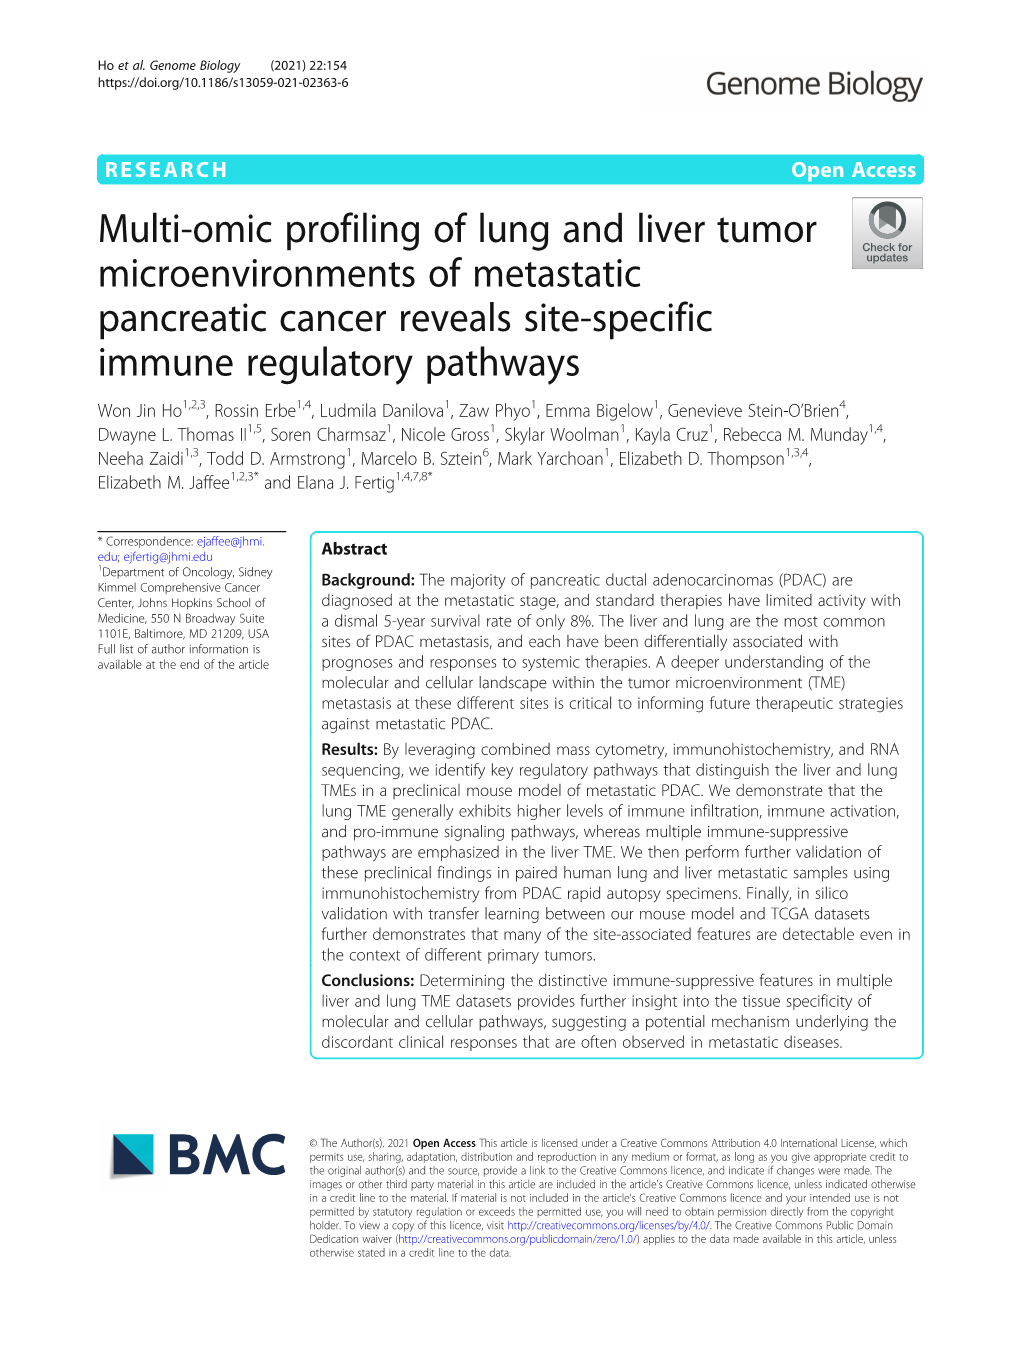 Multi-Omic Profiling of Lung and Liver Tumor